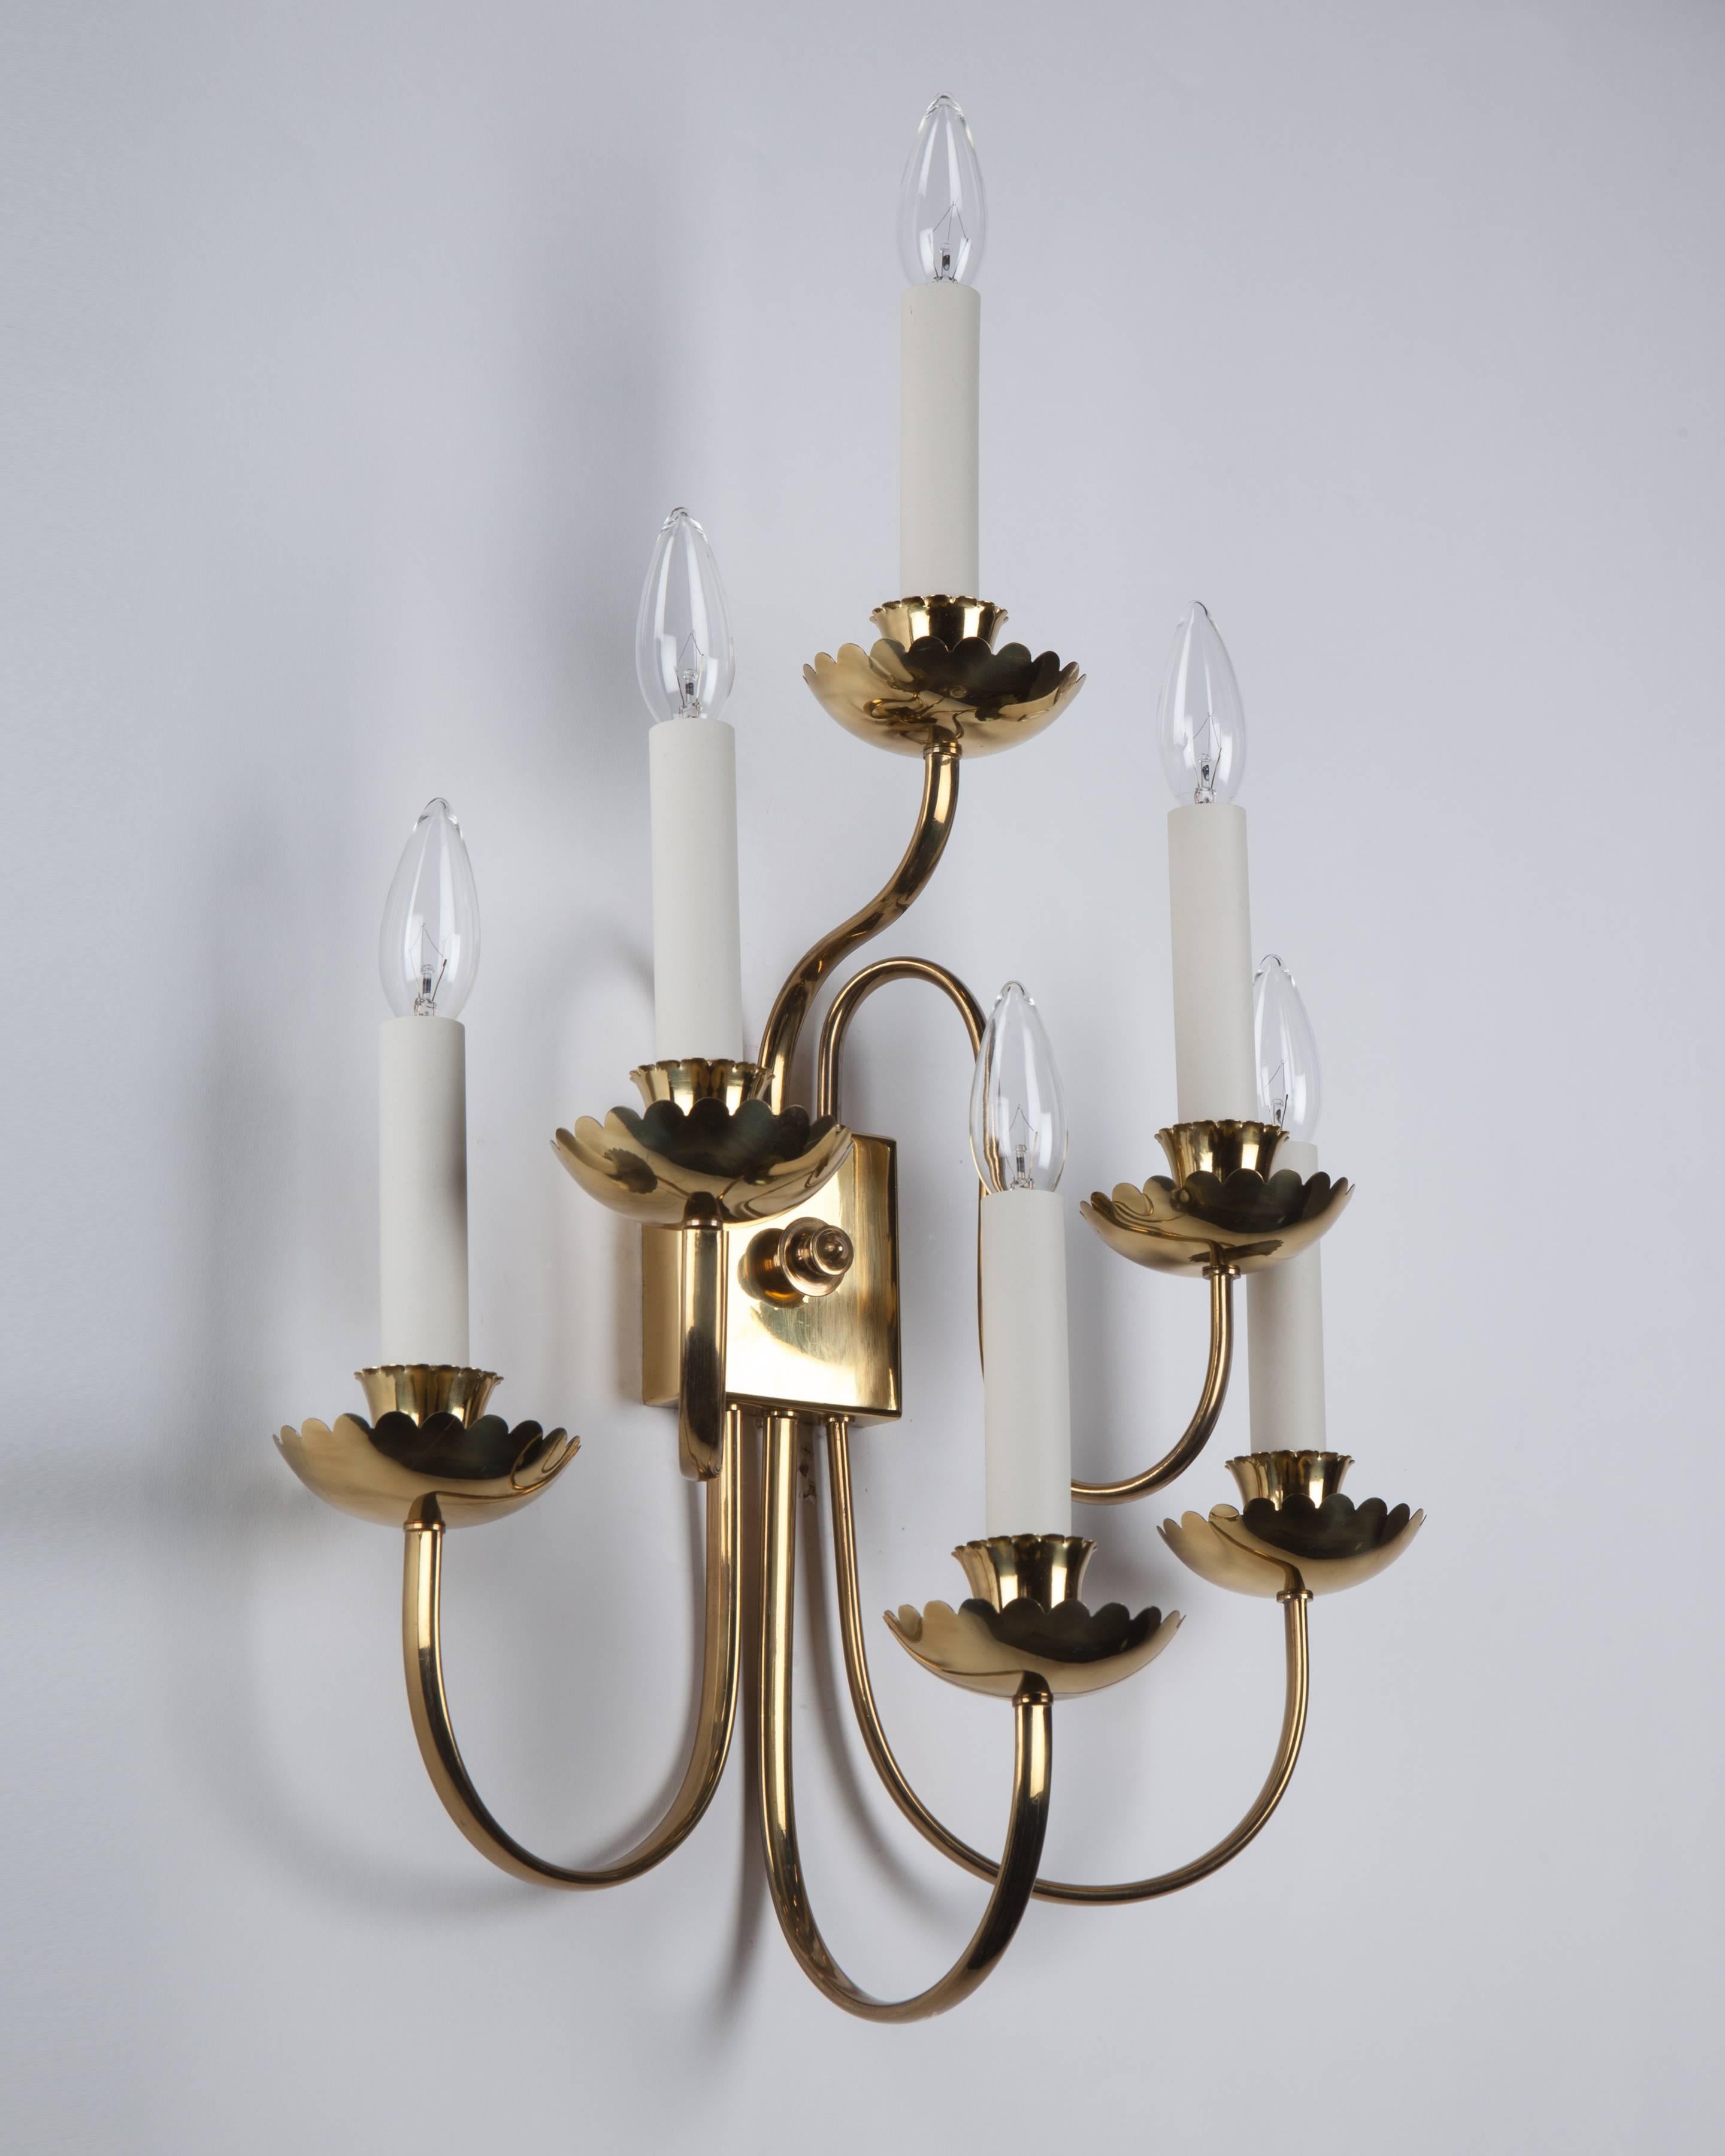 AIS3013
A pair of six-light Mid-Century sconces with sleek S-curving arms and scalloped-edge cups and bobeches in their original lacquered brass finish. Bearing Italian export stamps.
 